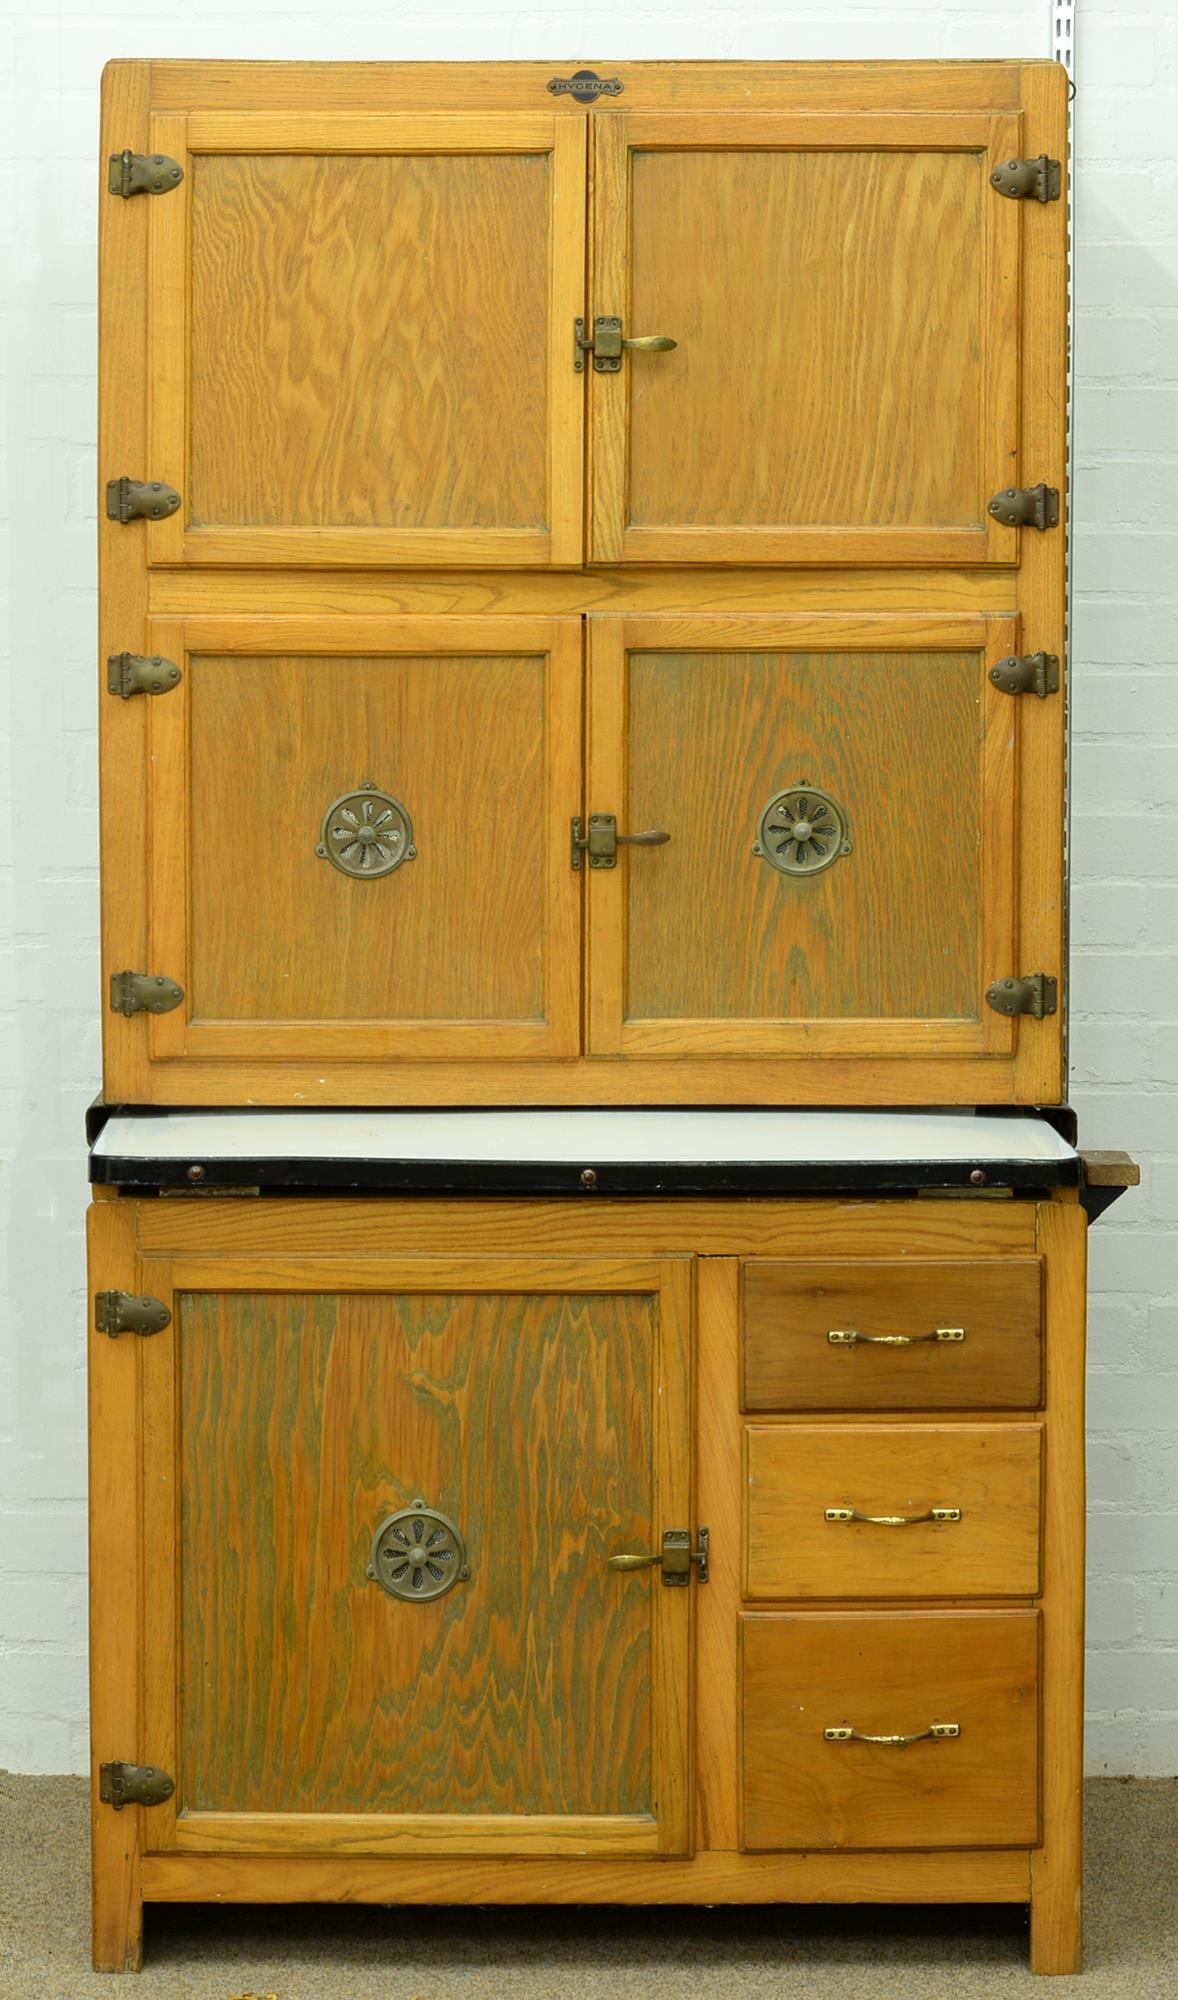 An early 20th c Hygena kitchen cupboard, with sliding enamelled work surface, the fitted interior